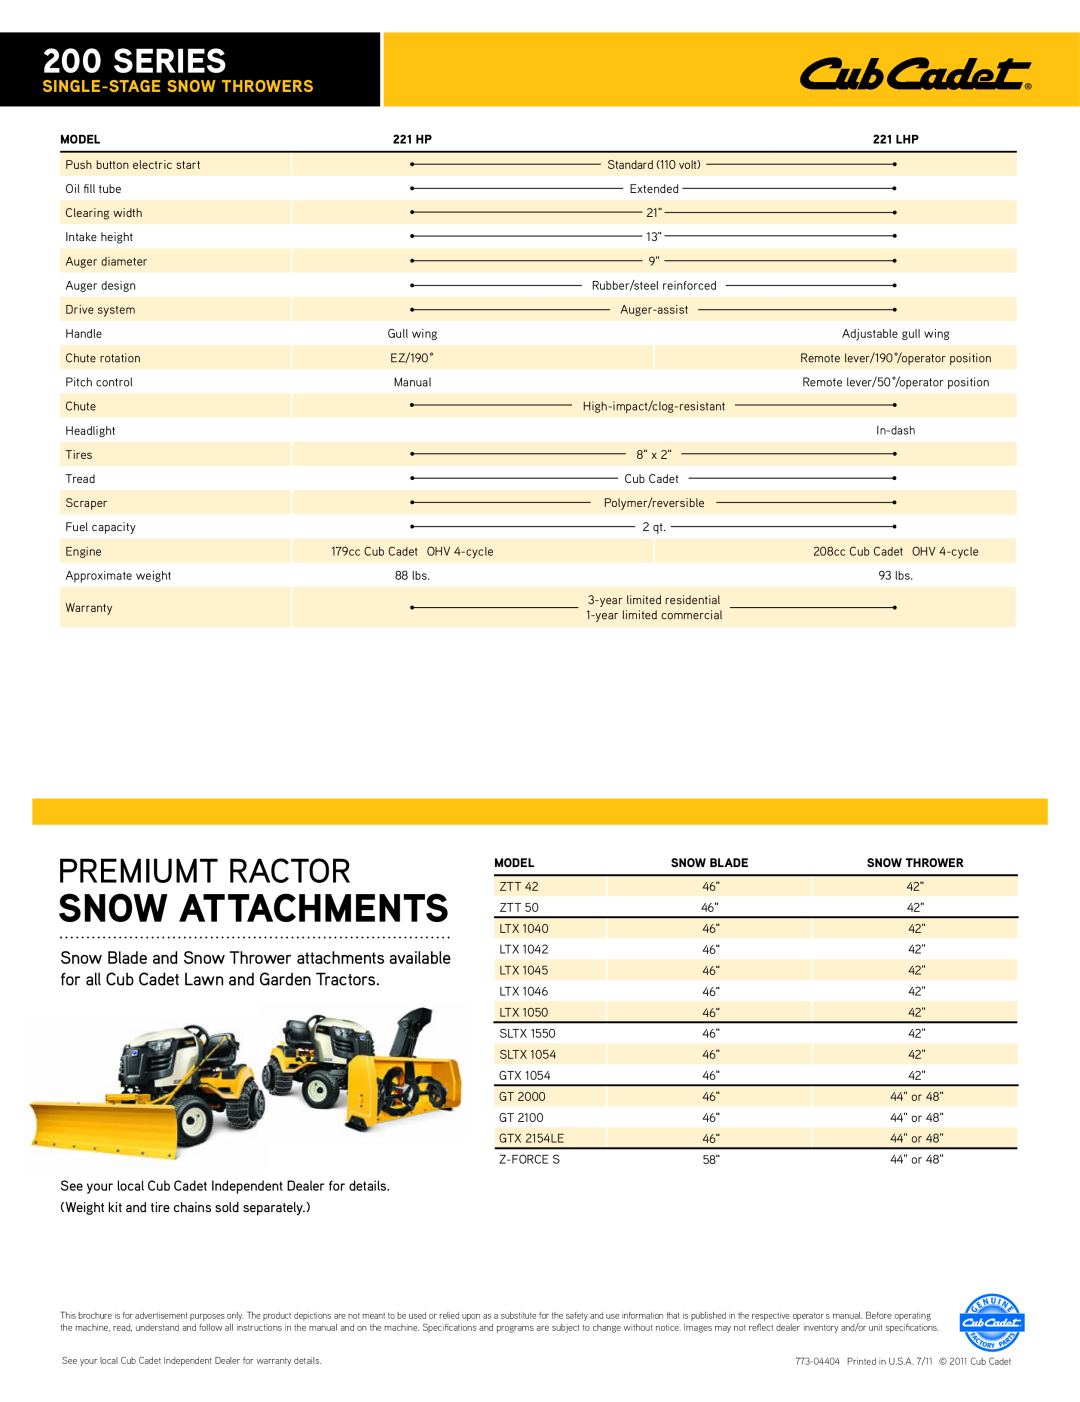 Cub Cadet 221 LHP specifications Snow Attachments, Series, Premiumt Ractor, Single-Stagesnow Throwers 